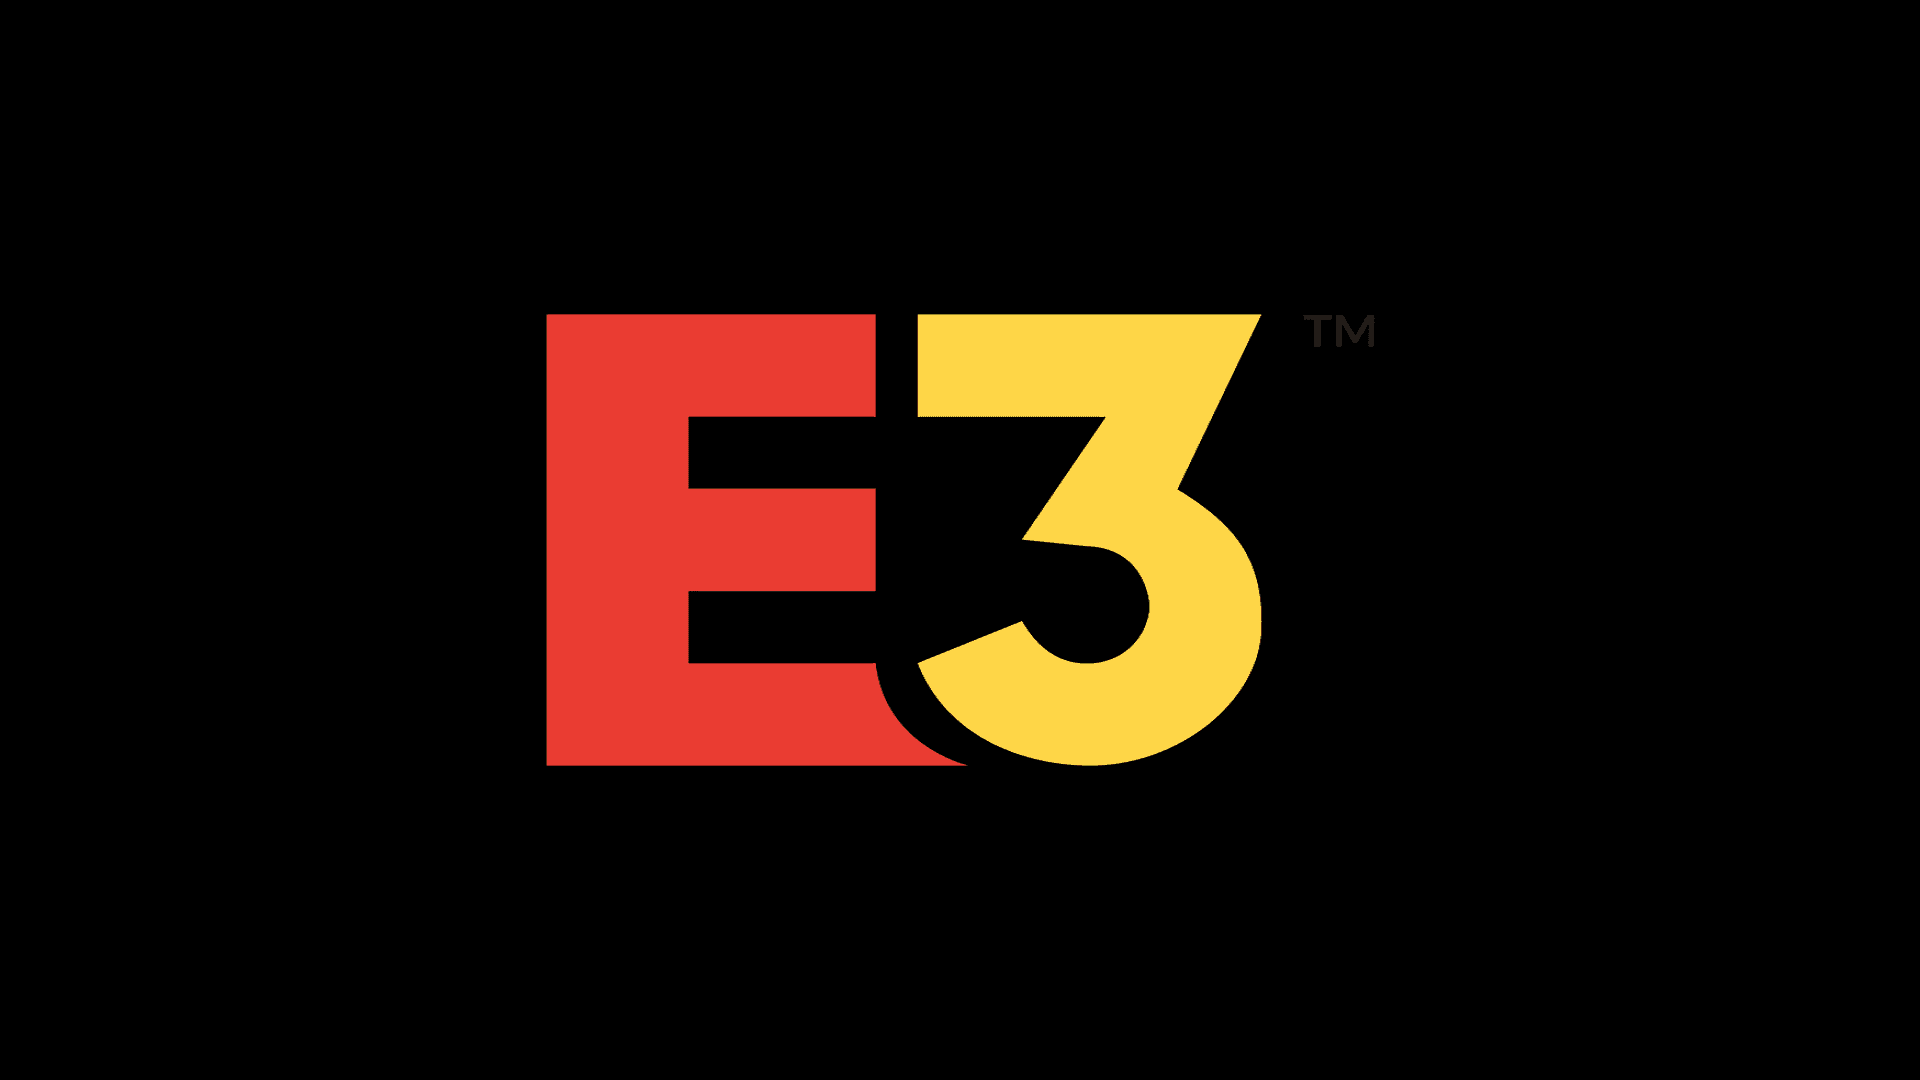 E3 2021 Dates Are Set, If People Can Attend Is A Different Matter